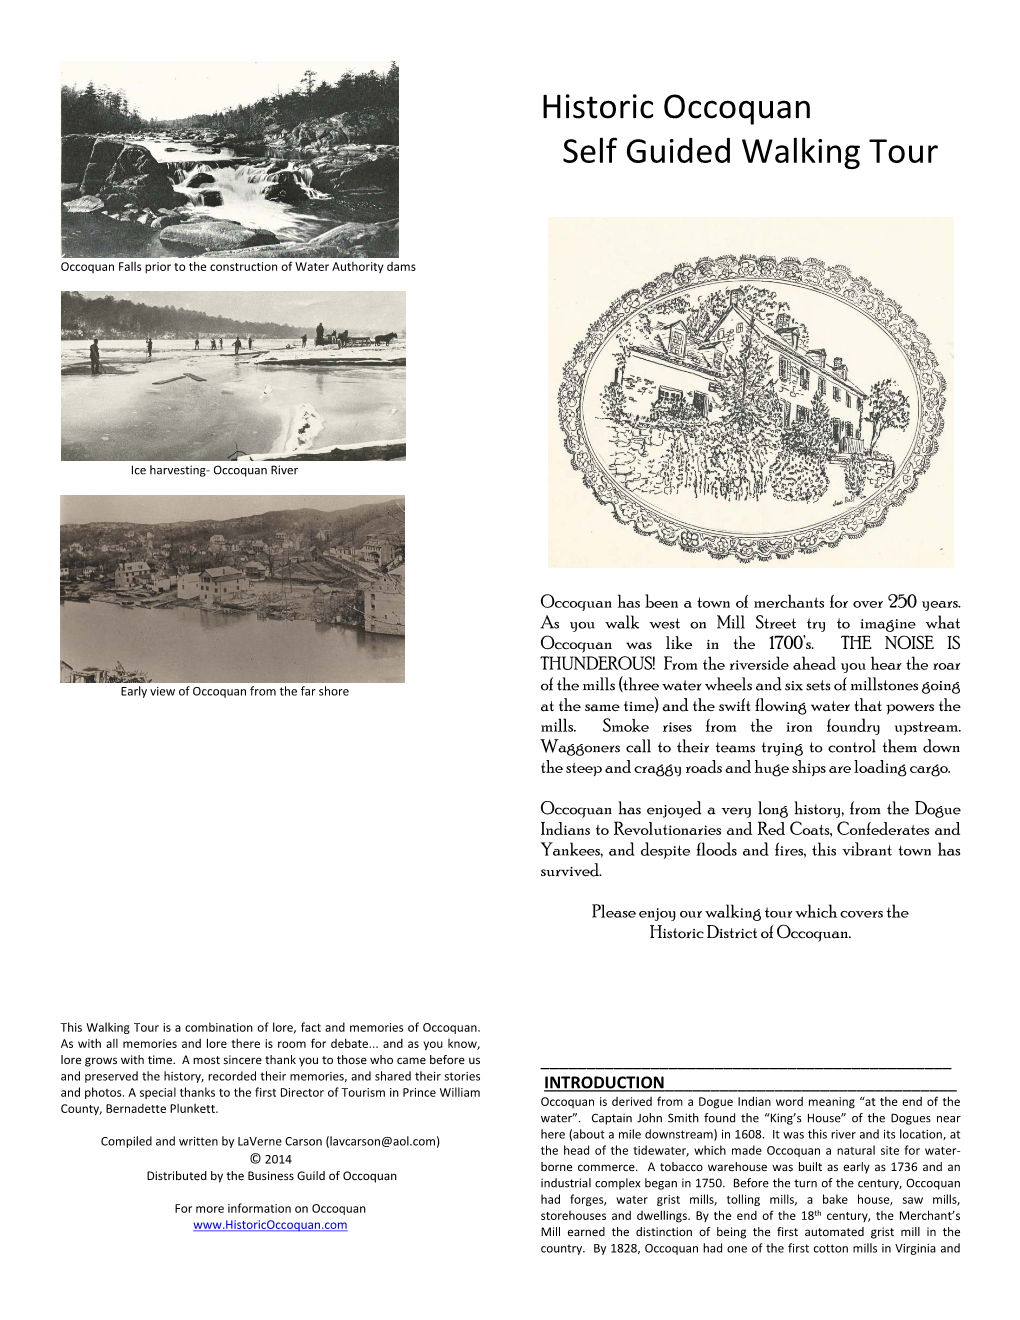 Historic Occoquan Self Guided Walking Tour